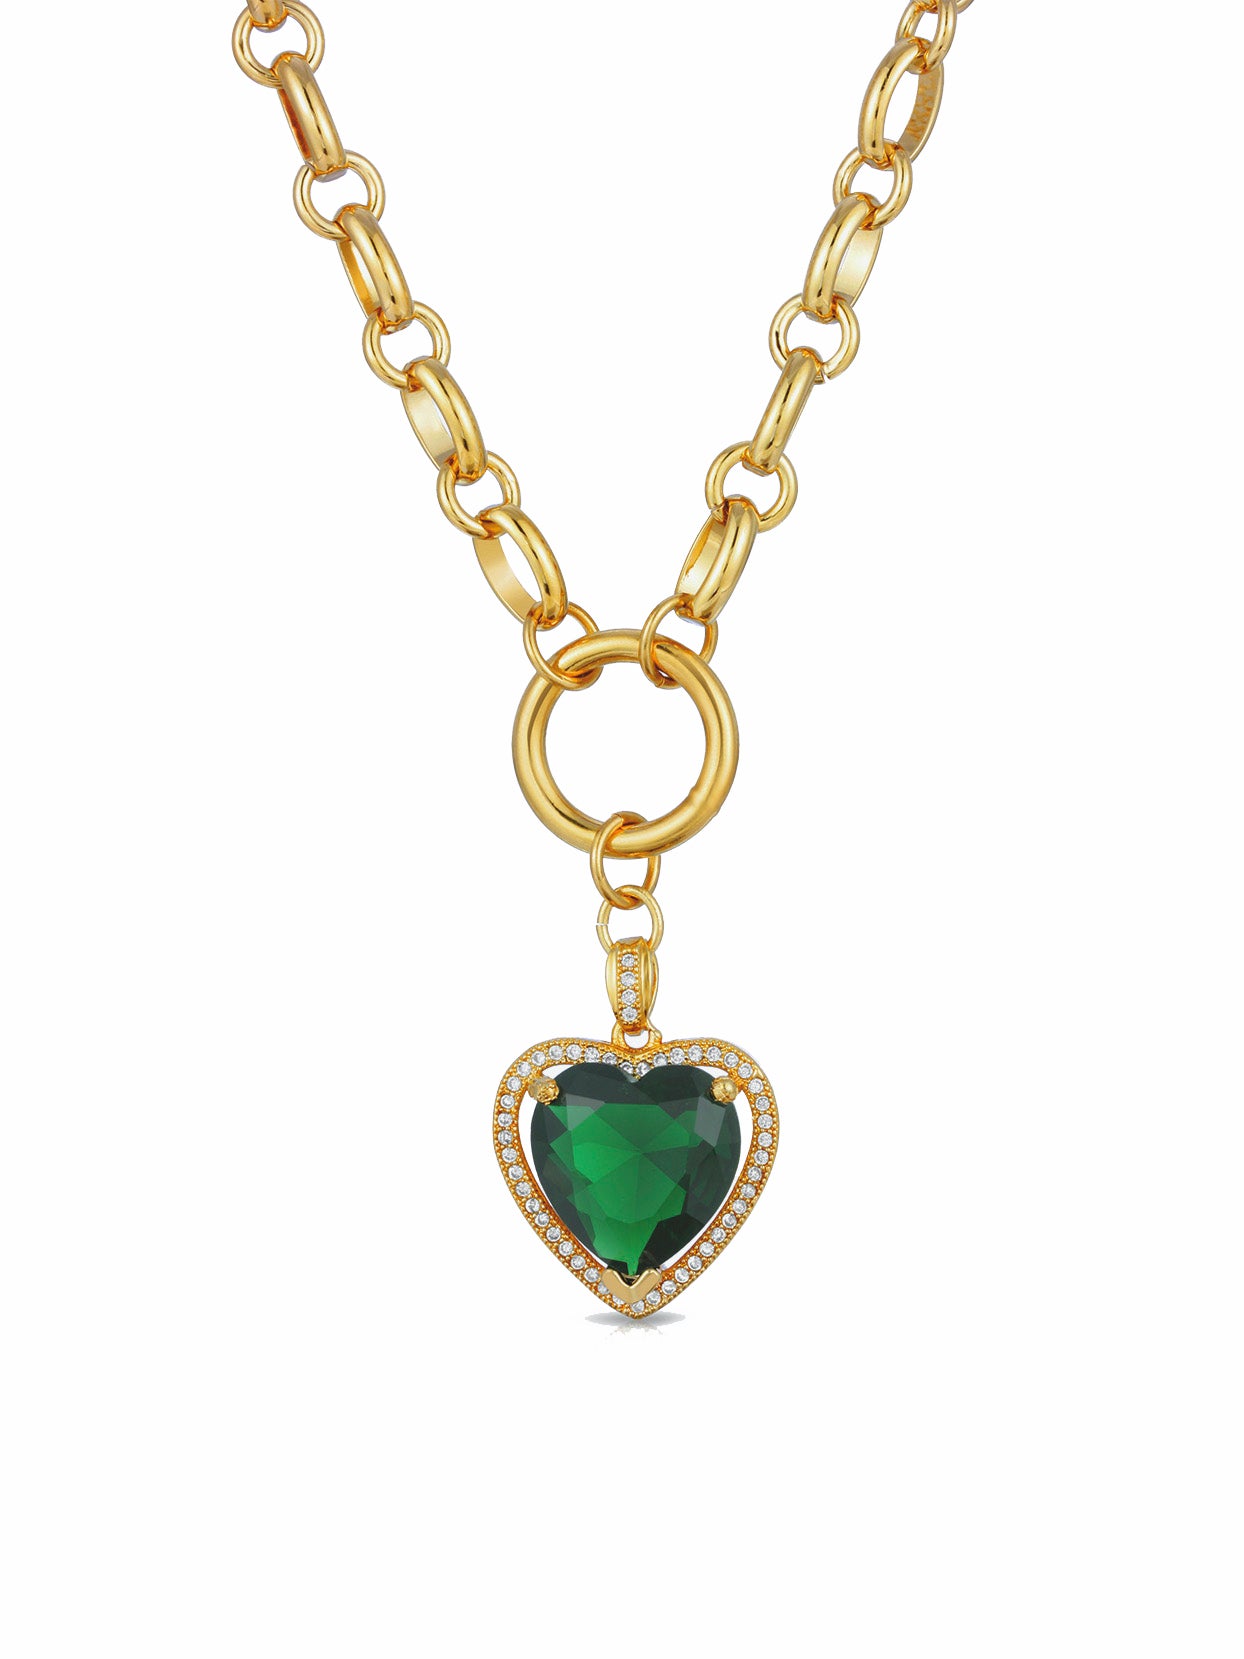 The Julia Heart Necklace